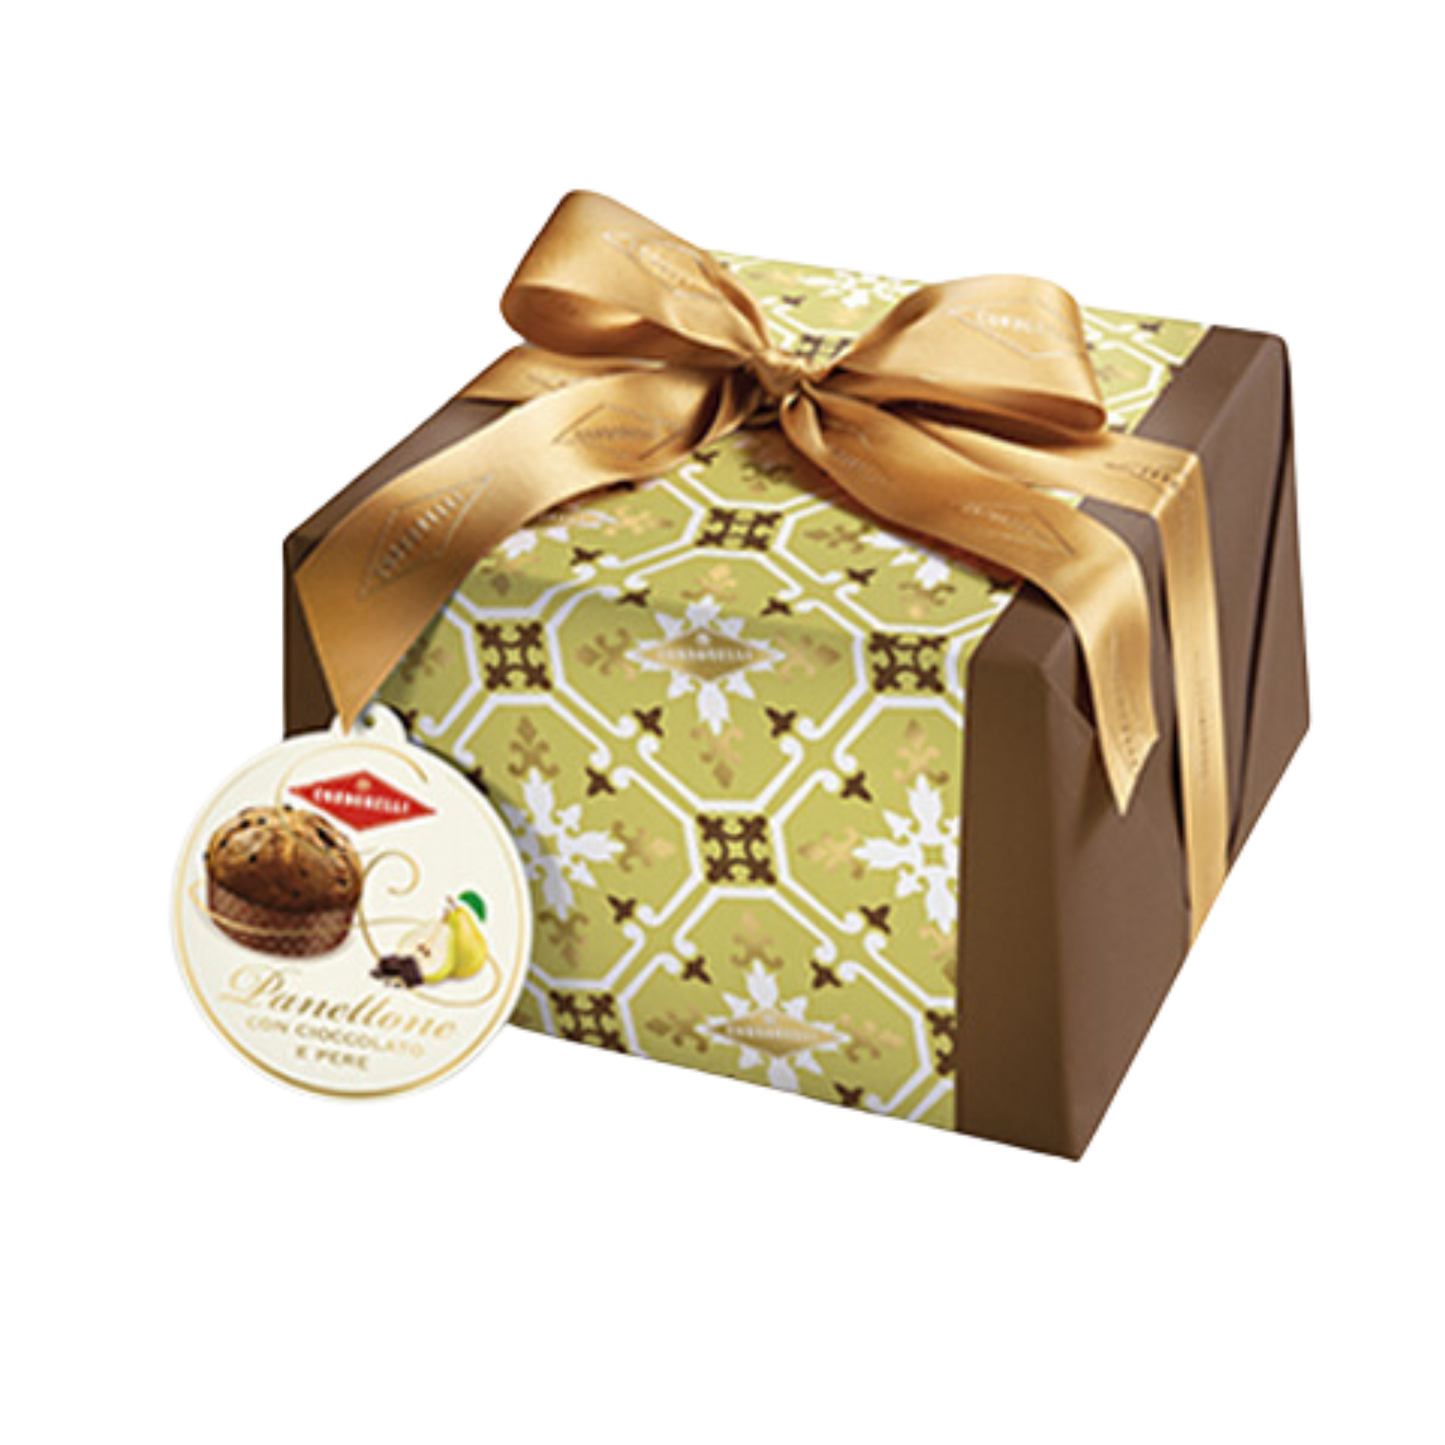 Panettone with Chocolate and Pears 1kg